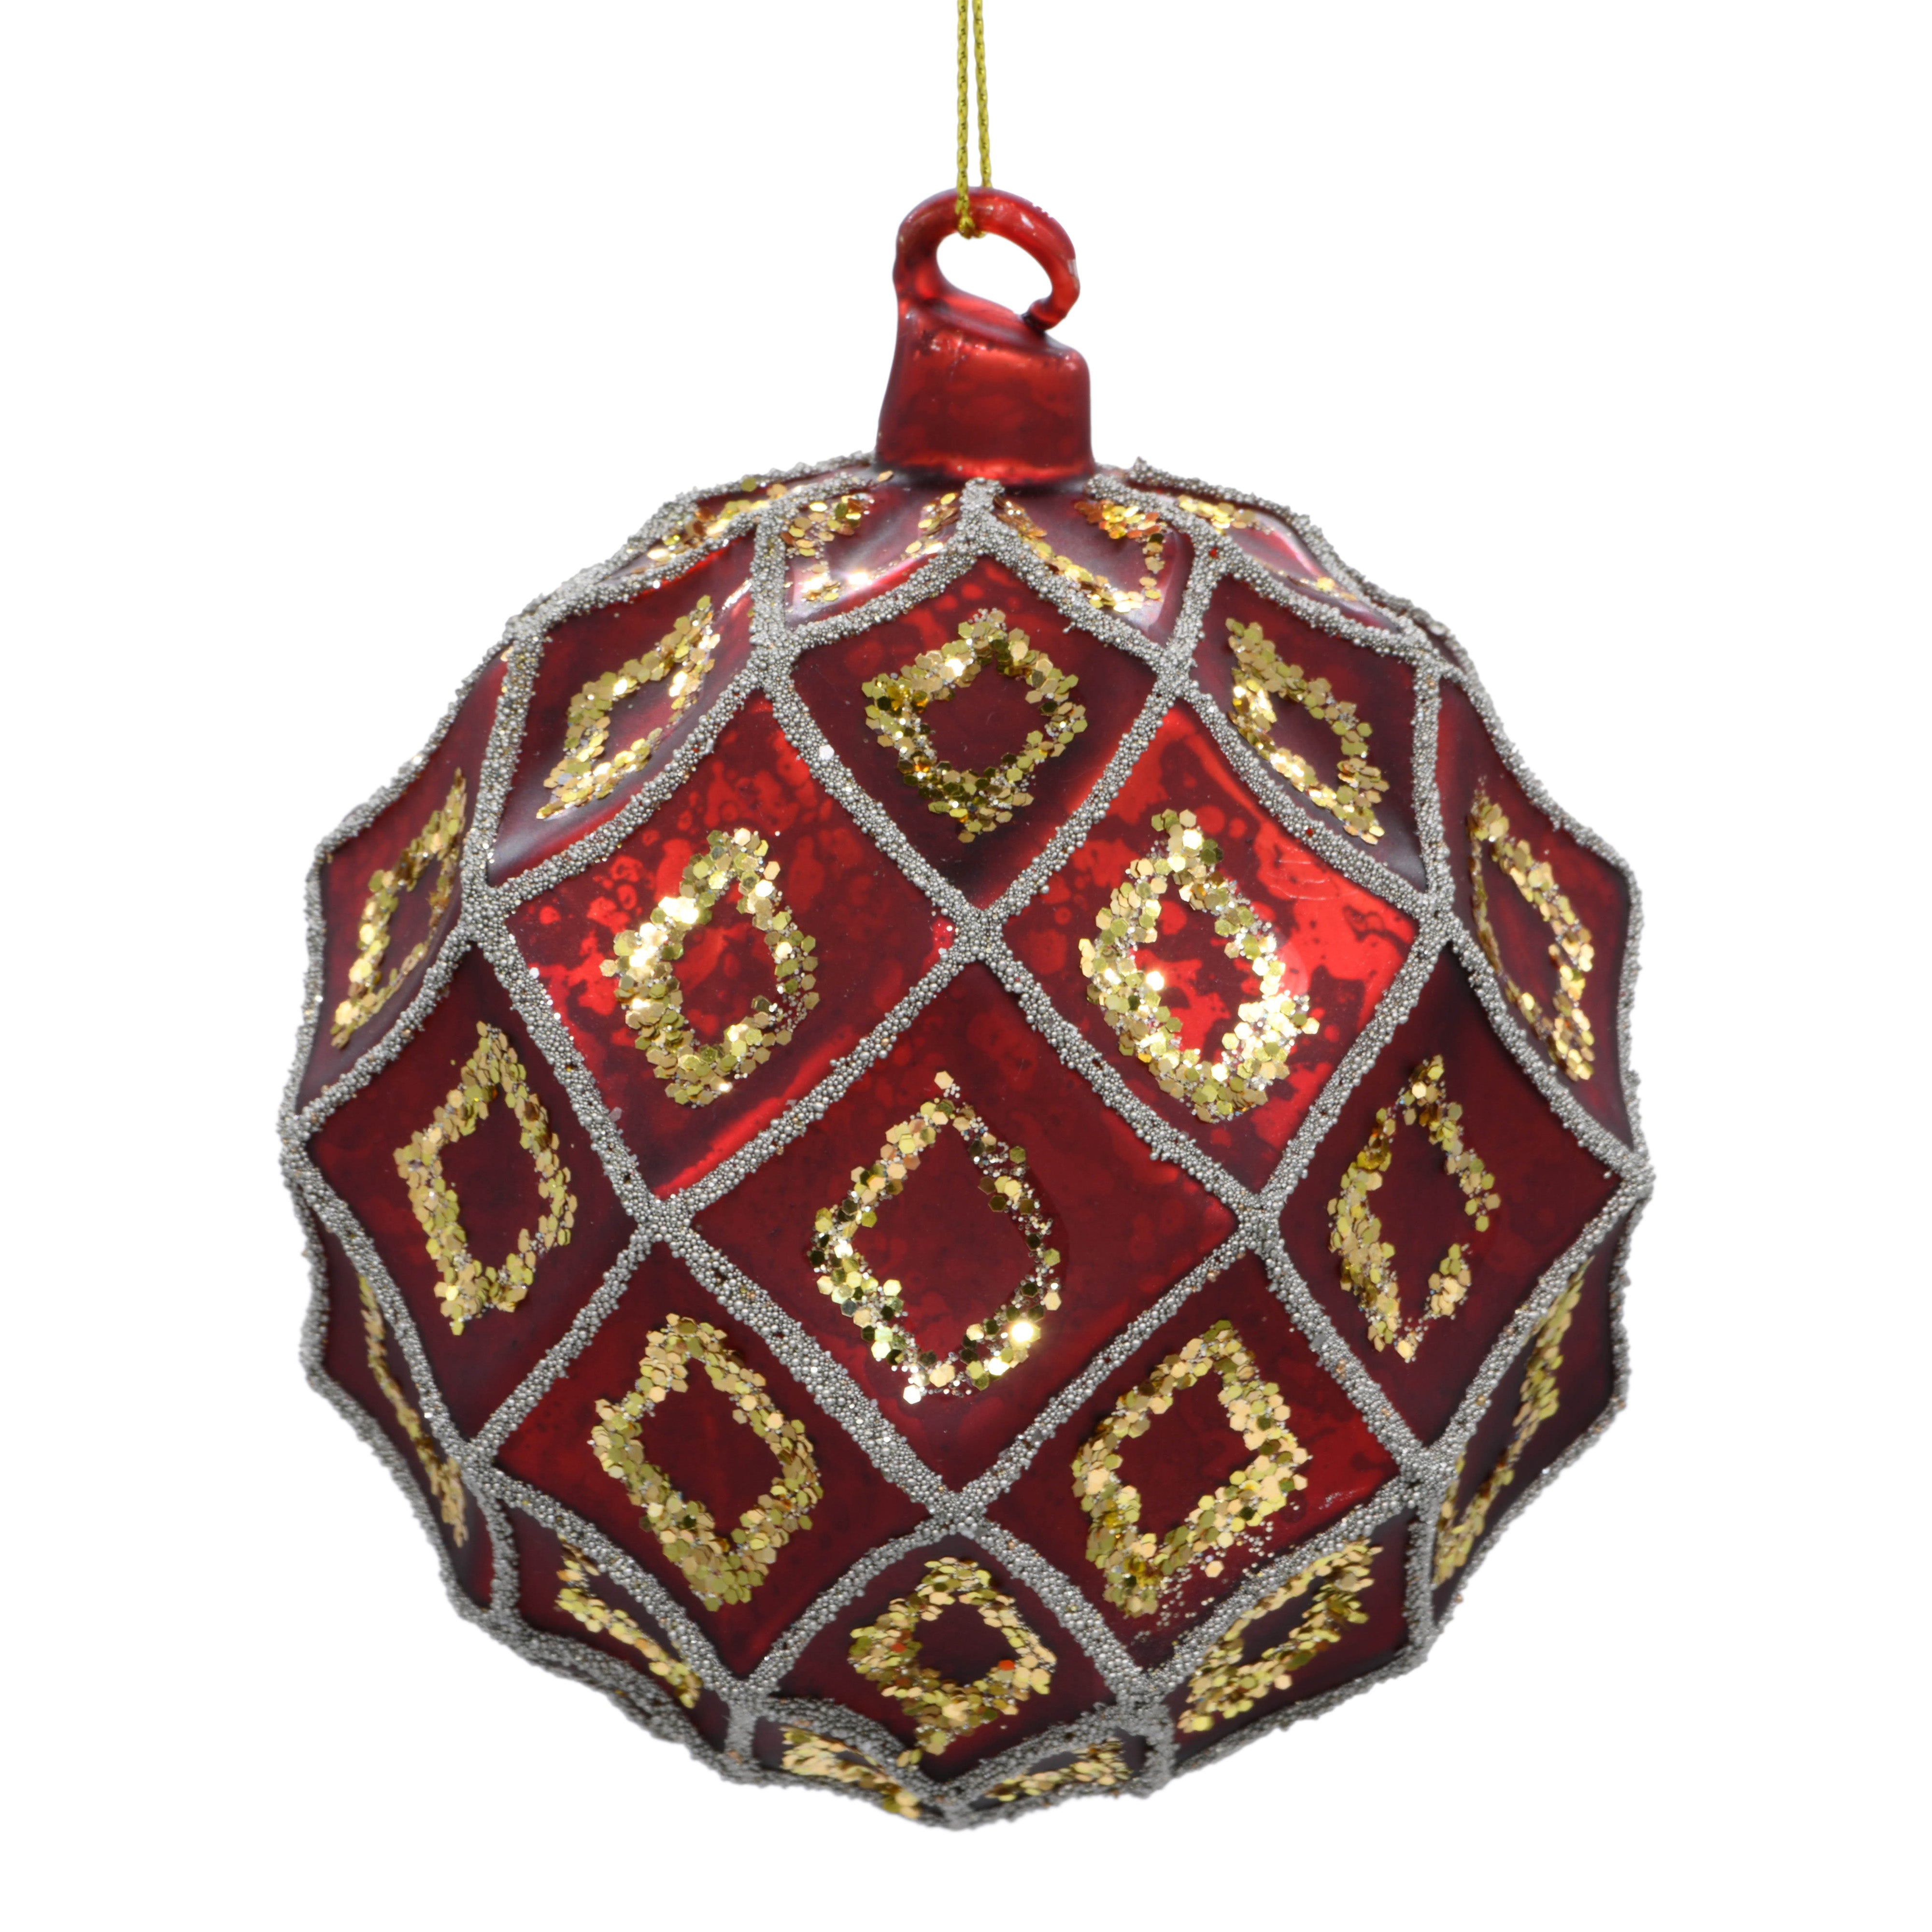 Red Christmas Tree Decoration on white background